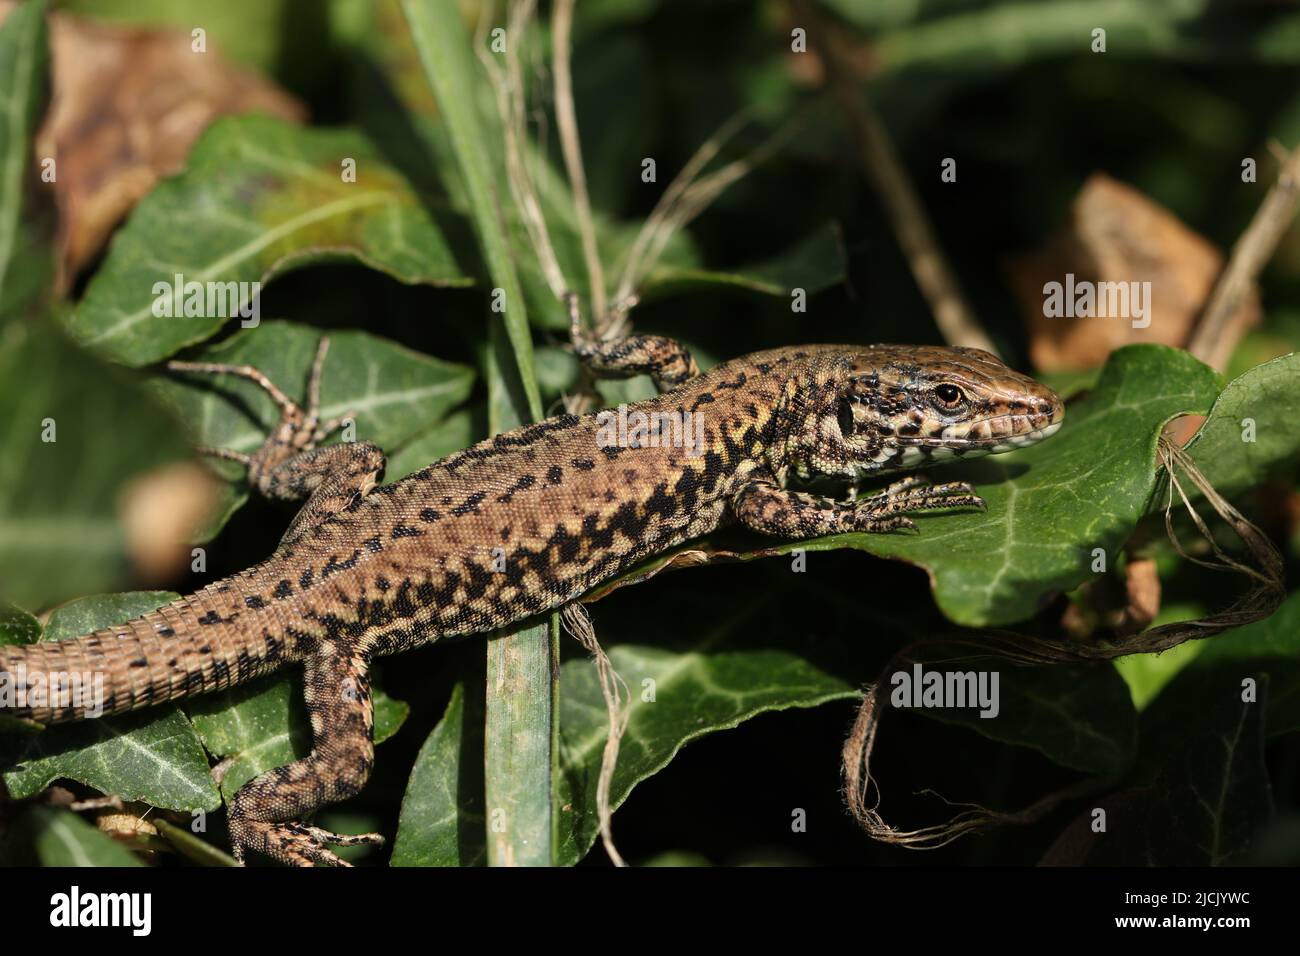 A non-native Wall Lizard, Podarcis muralis, warming itself up in the early morning sunshine hiding amongst the leaves of an Ivy plant. Stock Photo